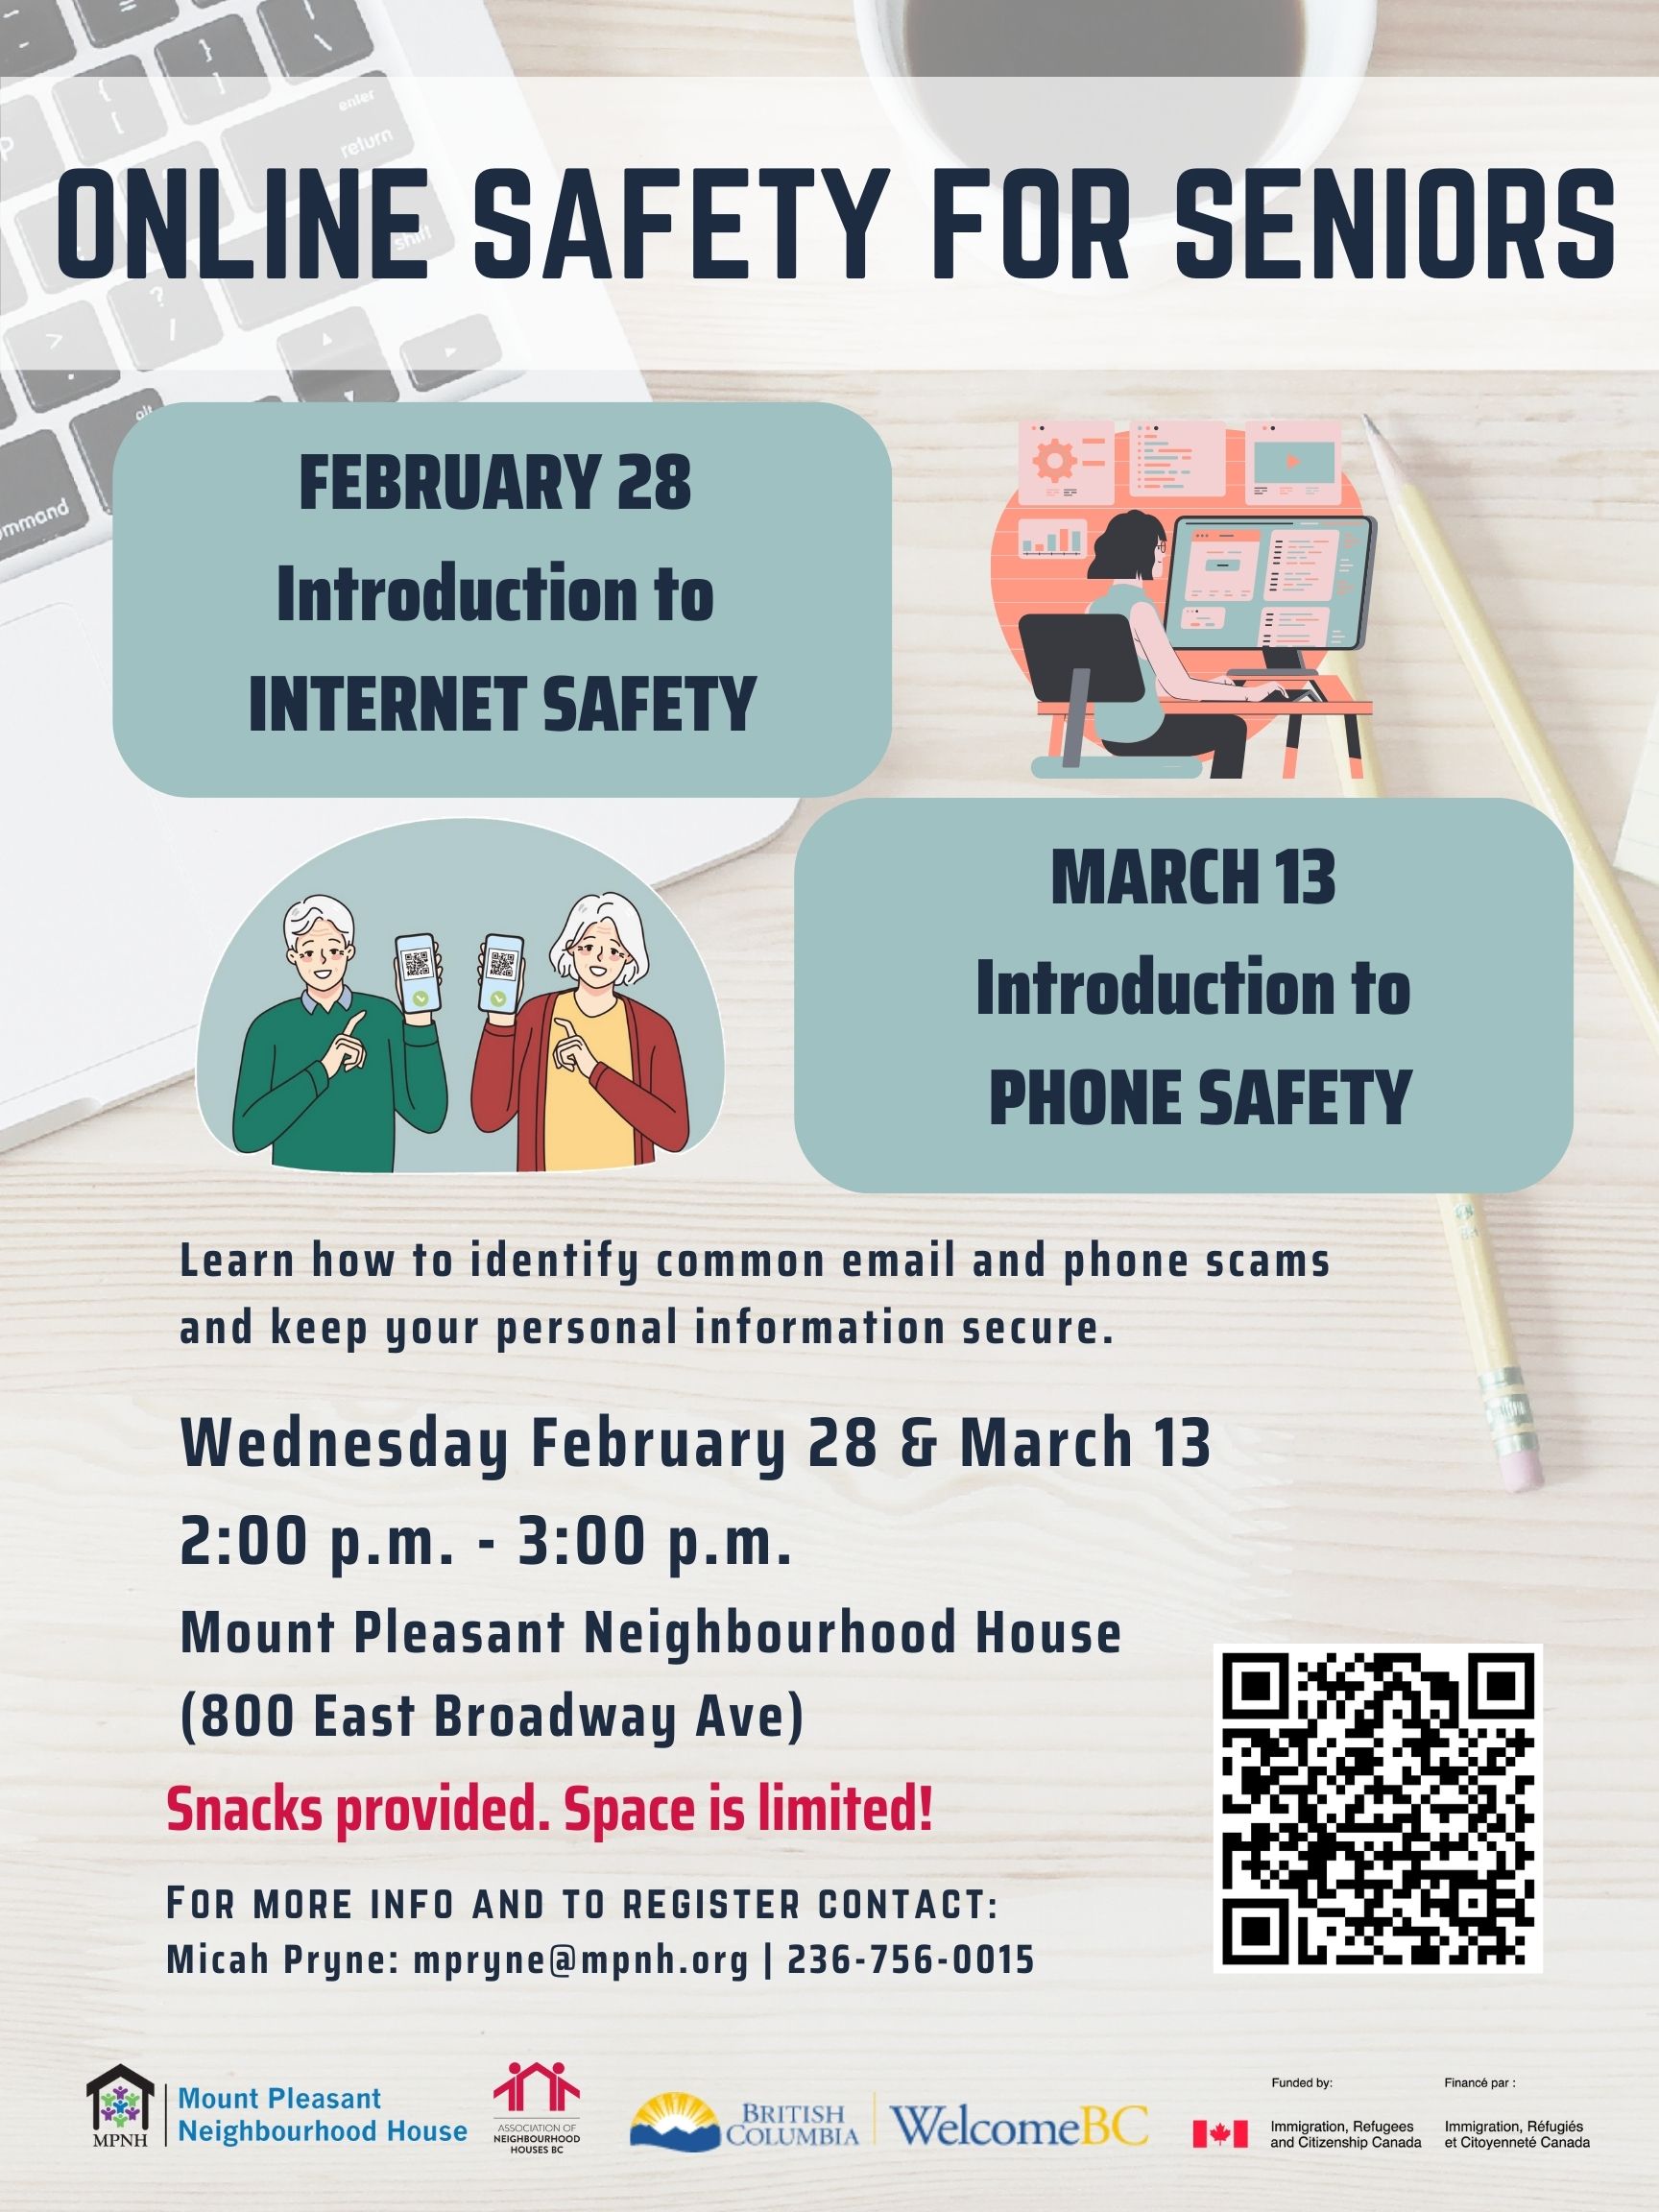 Poster that reads: Online Safety for Seniors, Feb 28th Introduction to Internet Safety, and MArch 13th, Introduction to Phone Safety.

2-3 PM, Mount Pleasant Neighbourhood House, For more info and to register contact:
Micah Pryne: mpryne@mpnh.org | 236-756-0015
